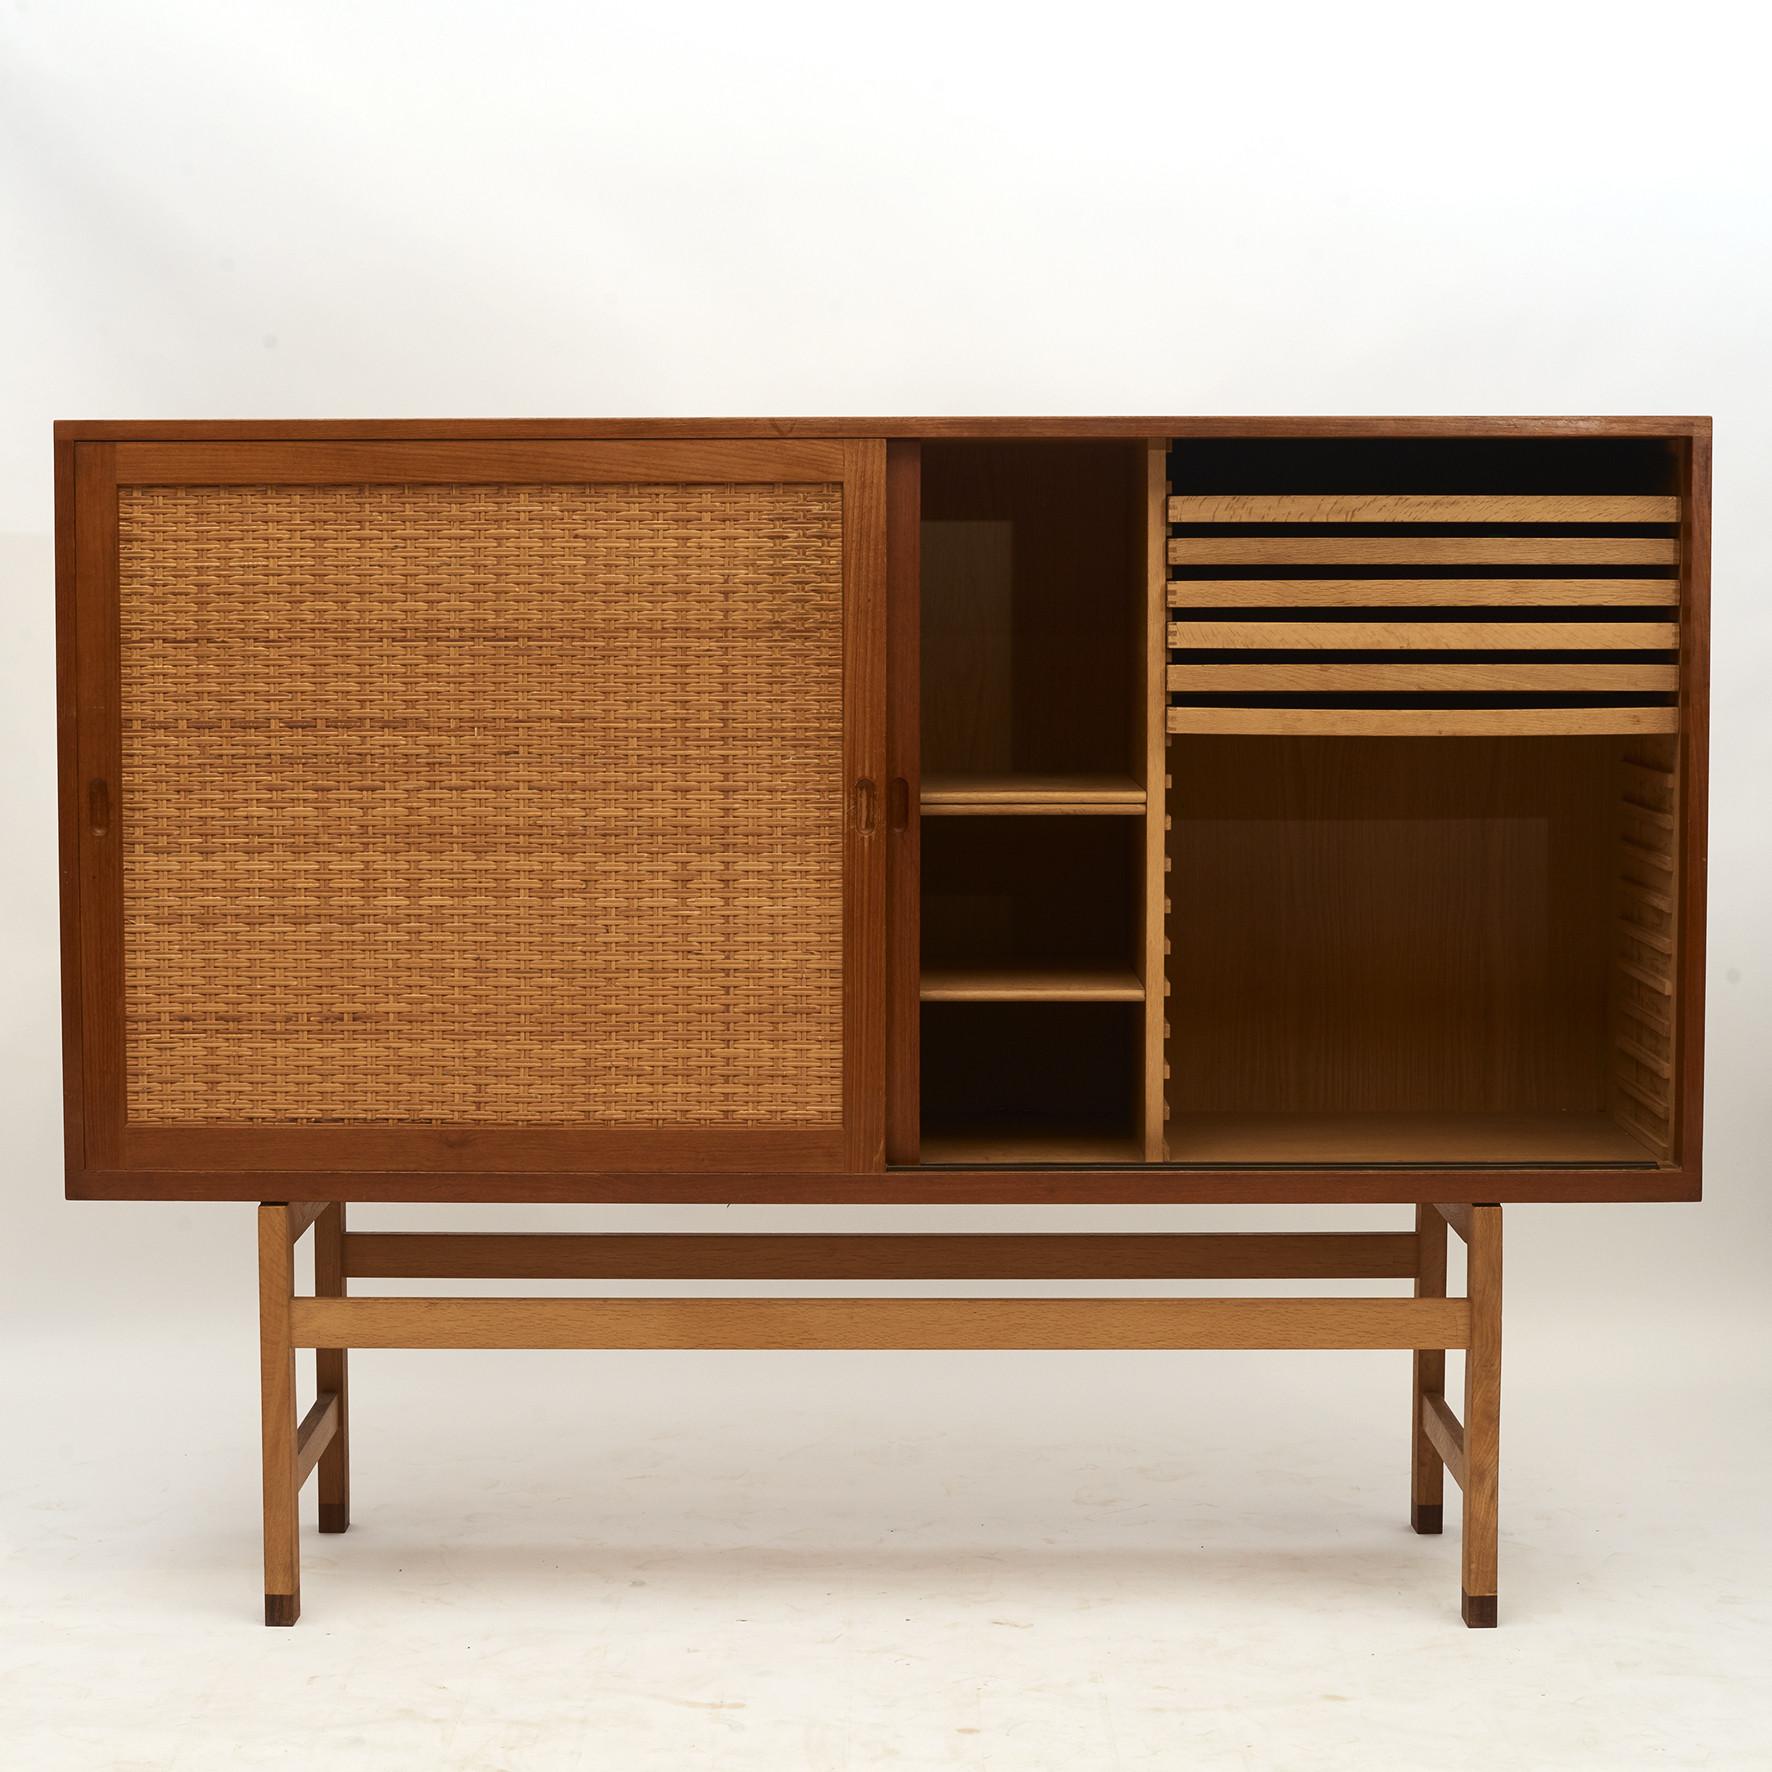 Hans J. Wegner.
Tall sideboard or cabinet in oak veneered in teak with sliding doors in cane. Solid oak base with rosewood feet.
Behind the doors you will find storage space with shelves and sliding trays.
Manufacturer: Ry Møbler, Denmark,